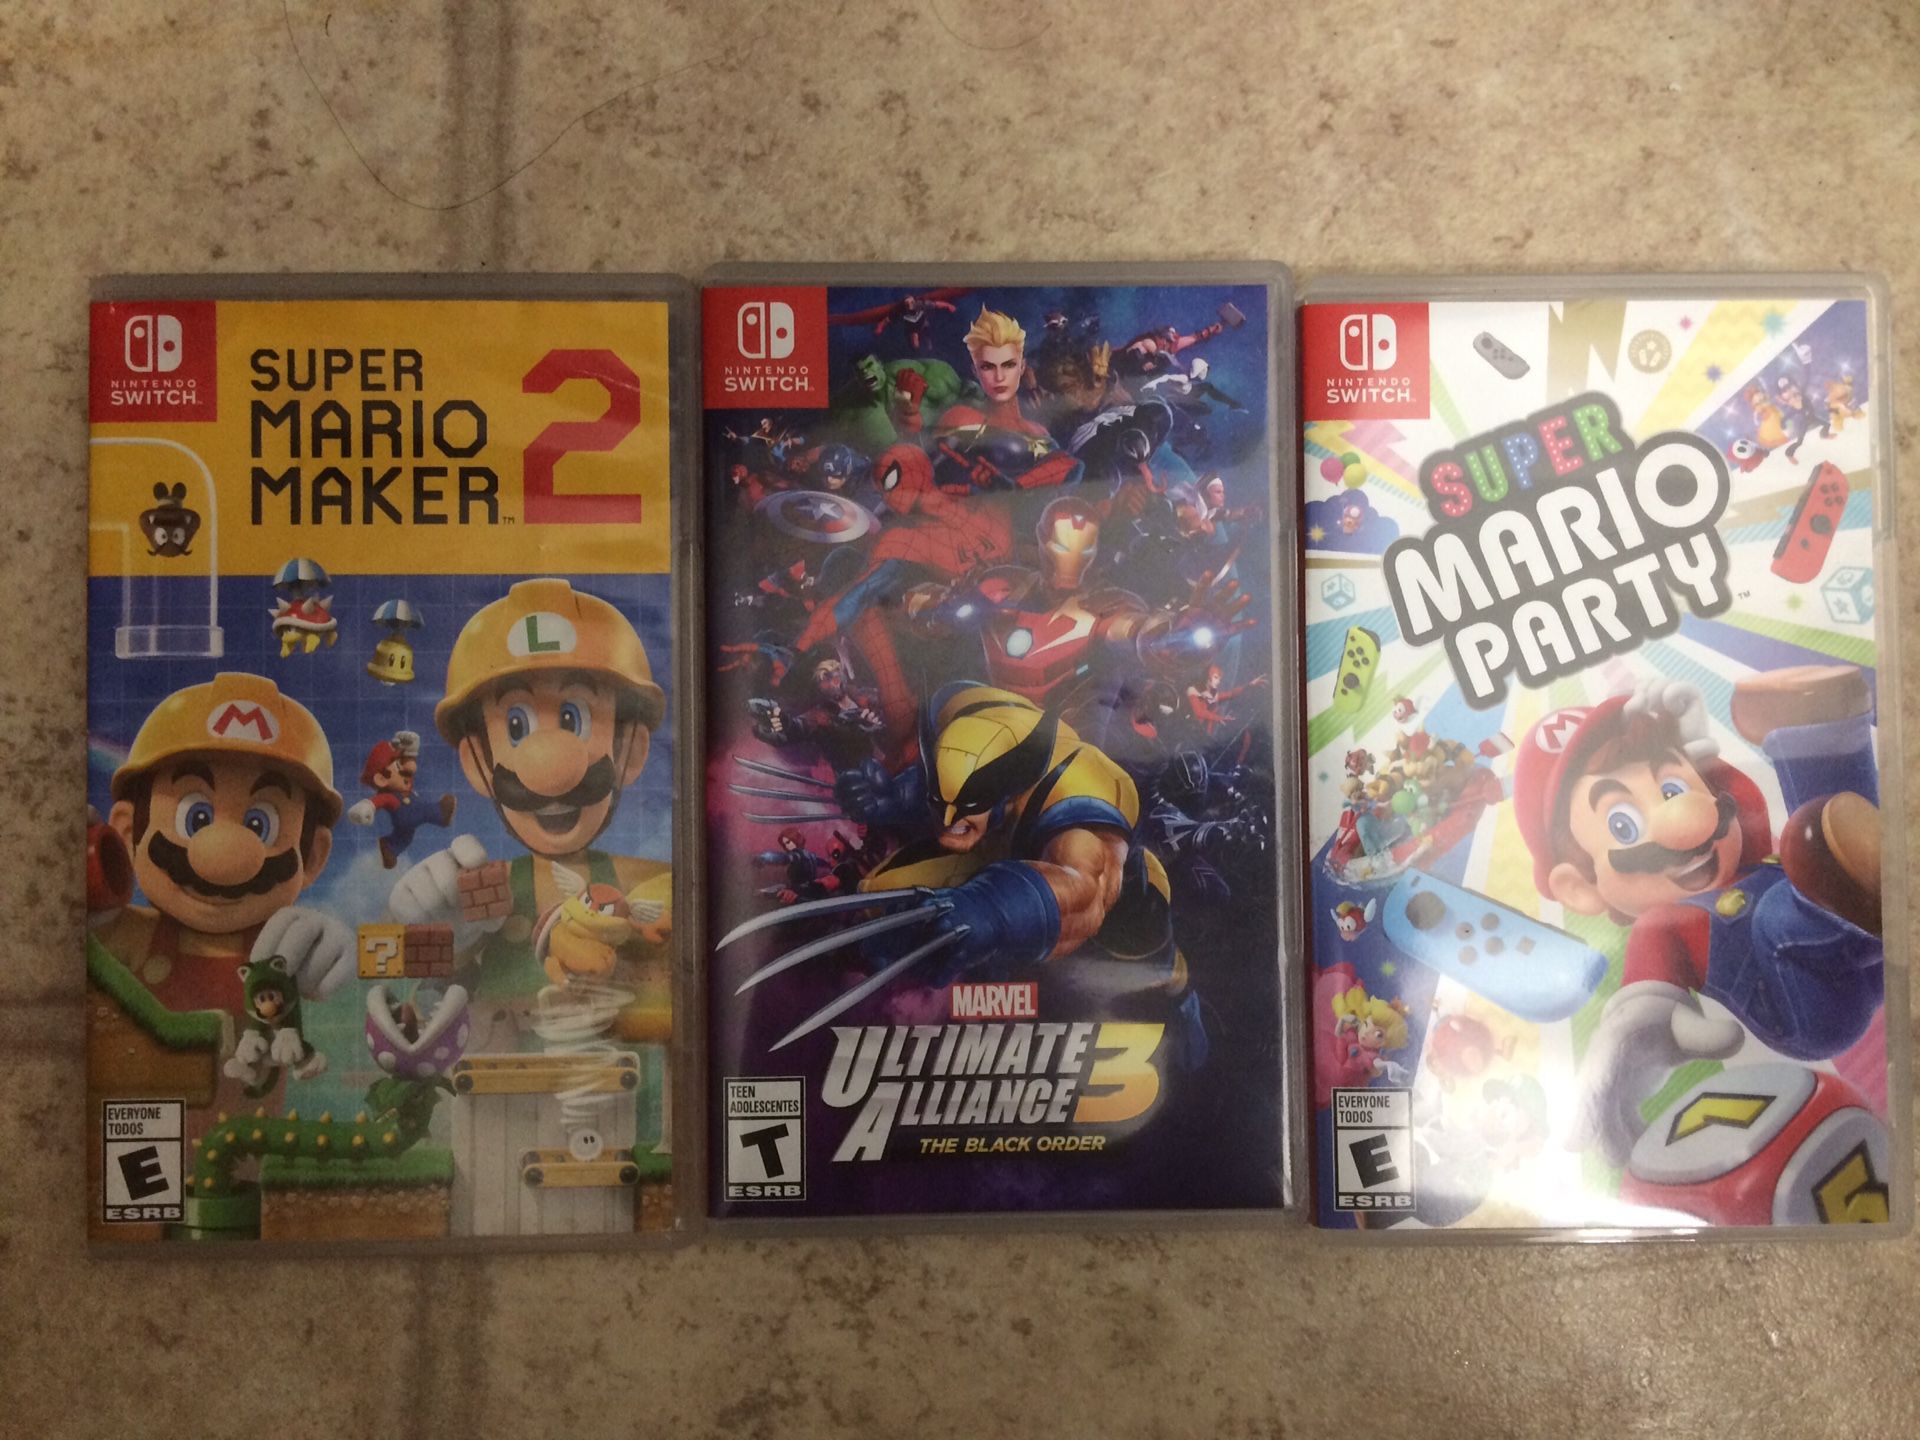 Super Mario Maker 2, Marvel Ultimate Alliance 3, Super Mario Party $40 each or take all for 100